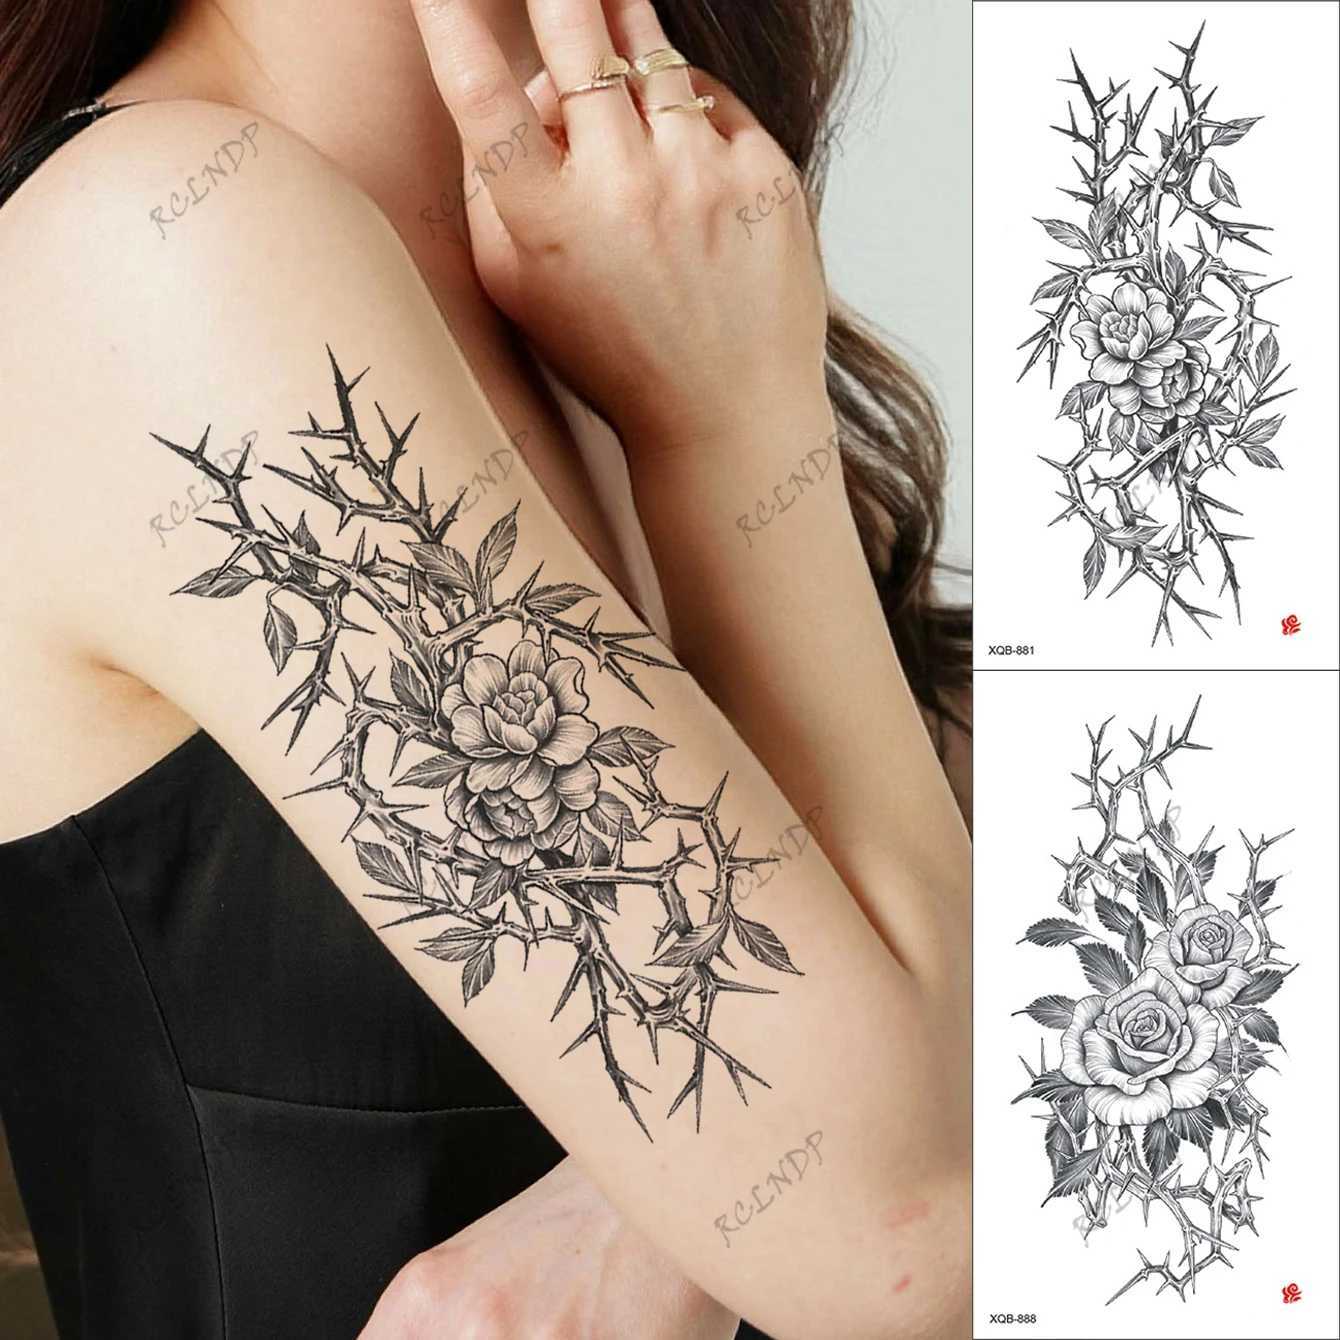 Transfert de tatouage Autocollant temporaire imperméable Sticker Sketing Flowers and Thorns Faux Tatto Flash Tatoo Arms CHIGHS Back Tato for Women 240426